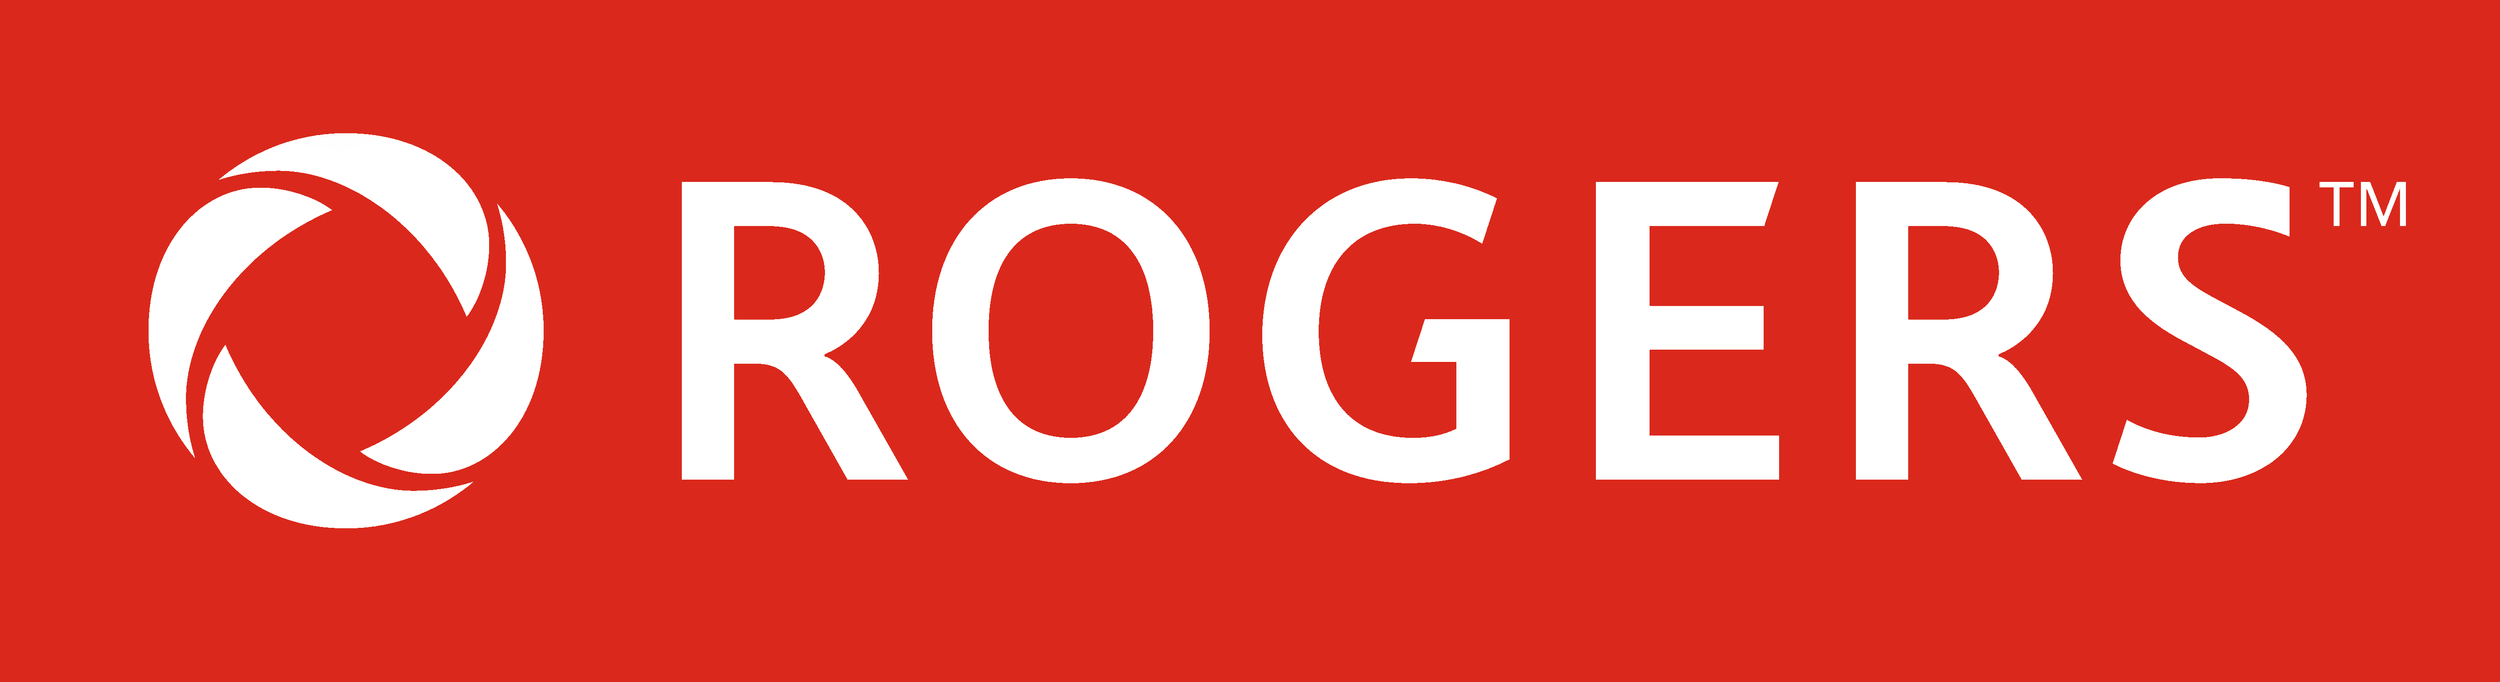 Rogers_logotype_red_bg.png